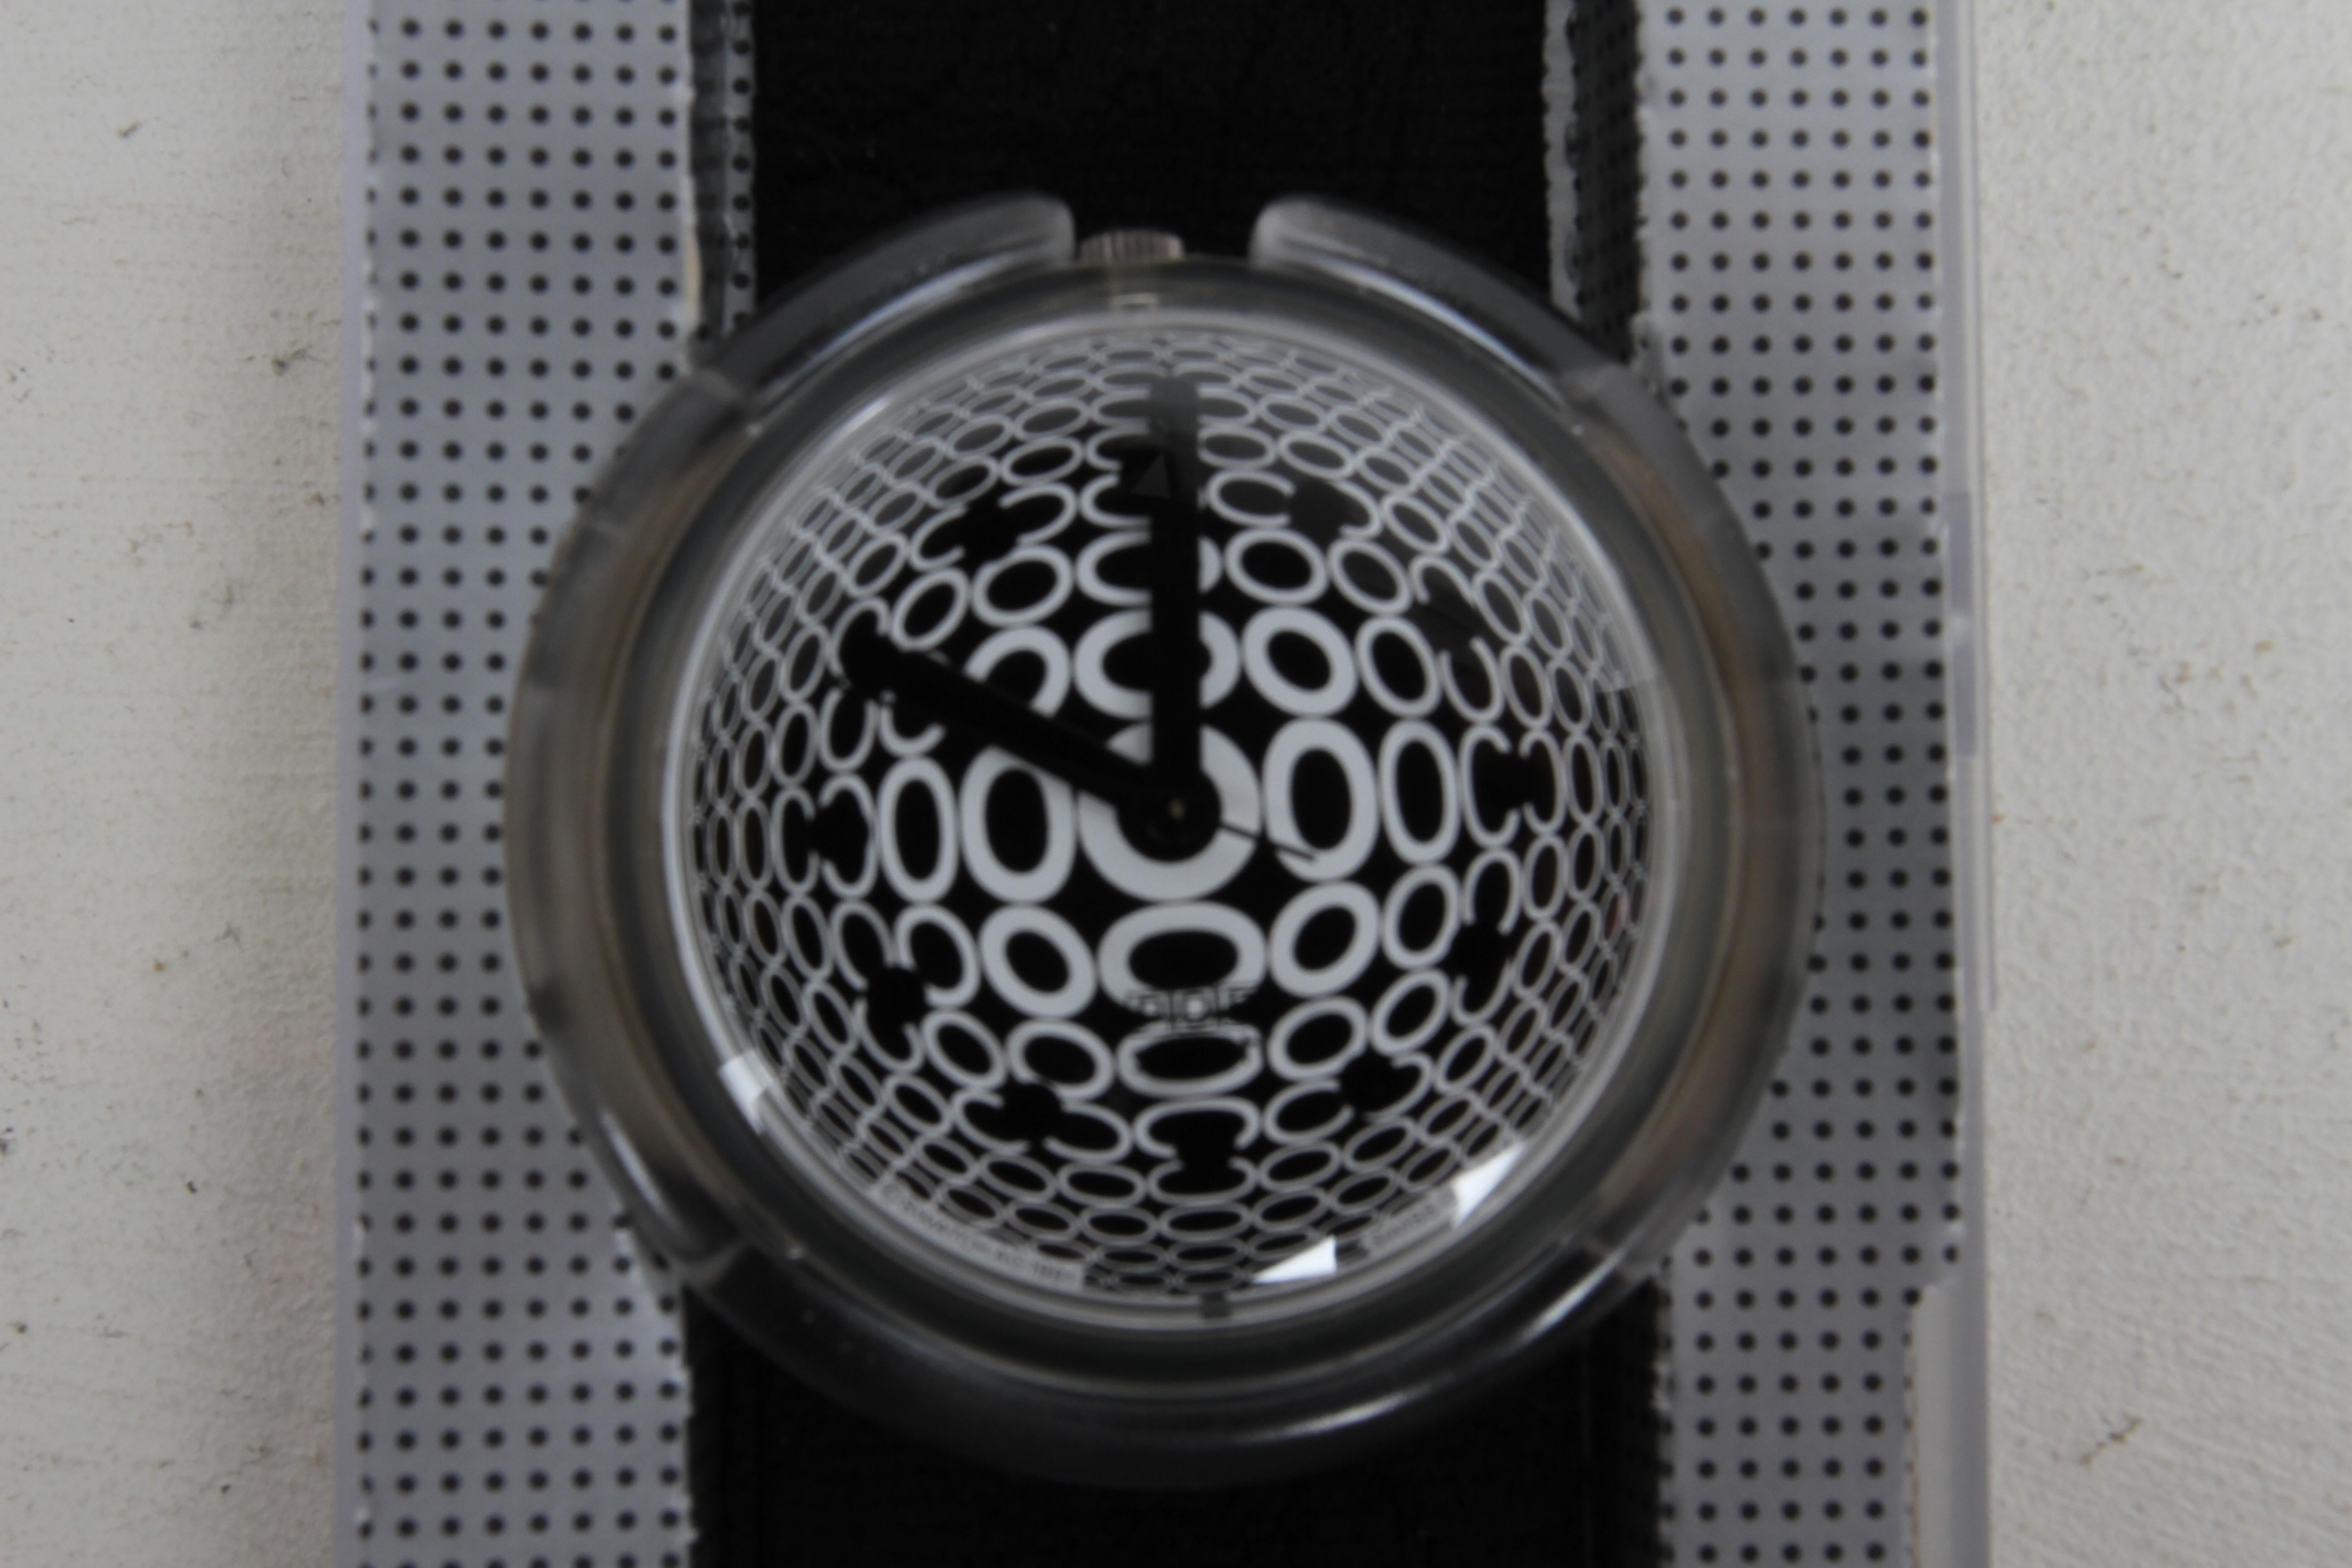 1992 Vintage POP Swatch Watch Special Dots - Op Art - Designed by Vasarely - NOS For Sale 5